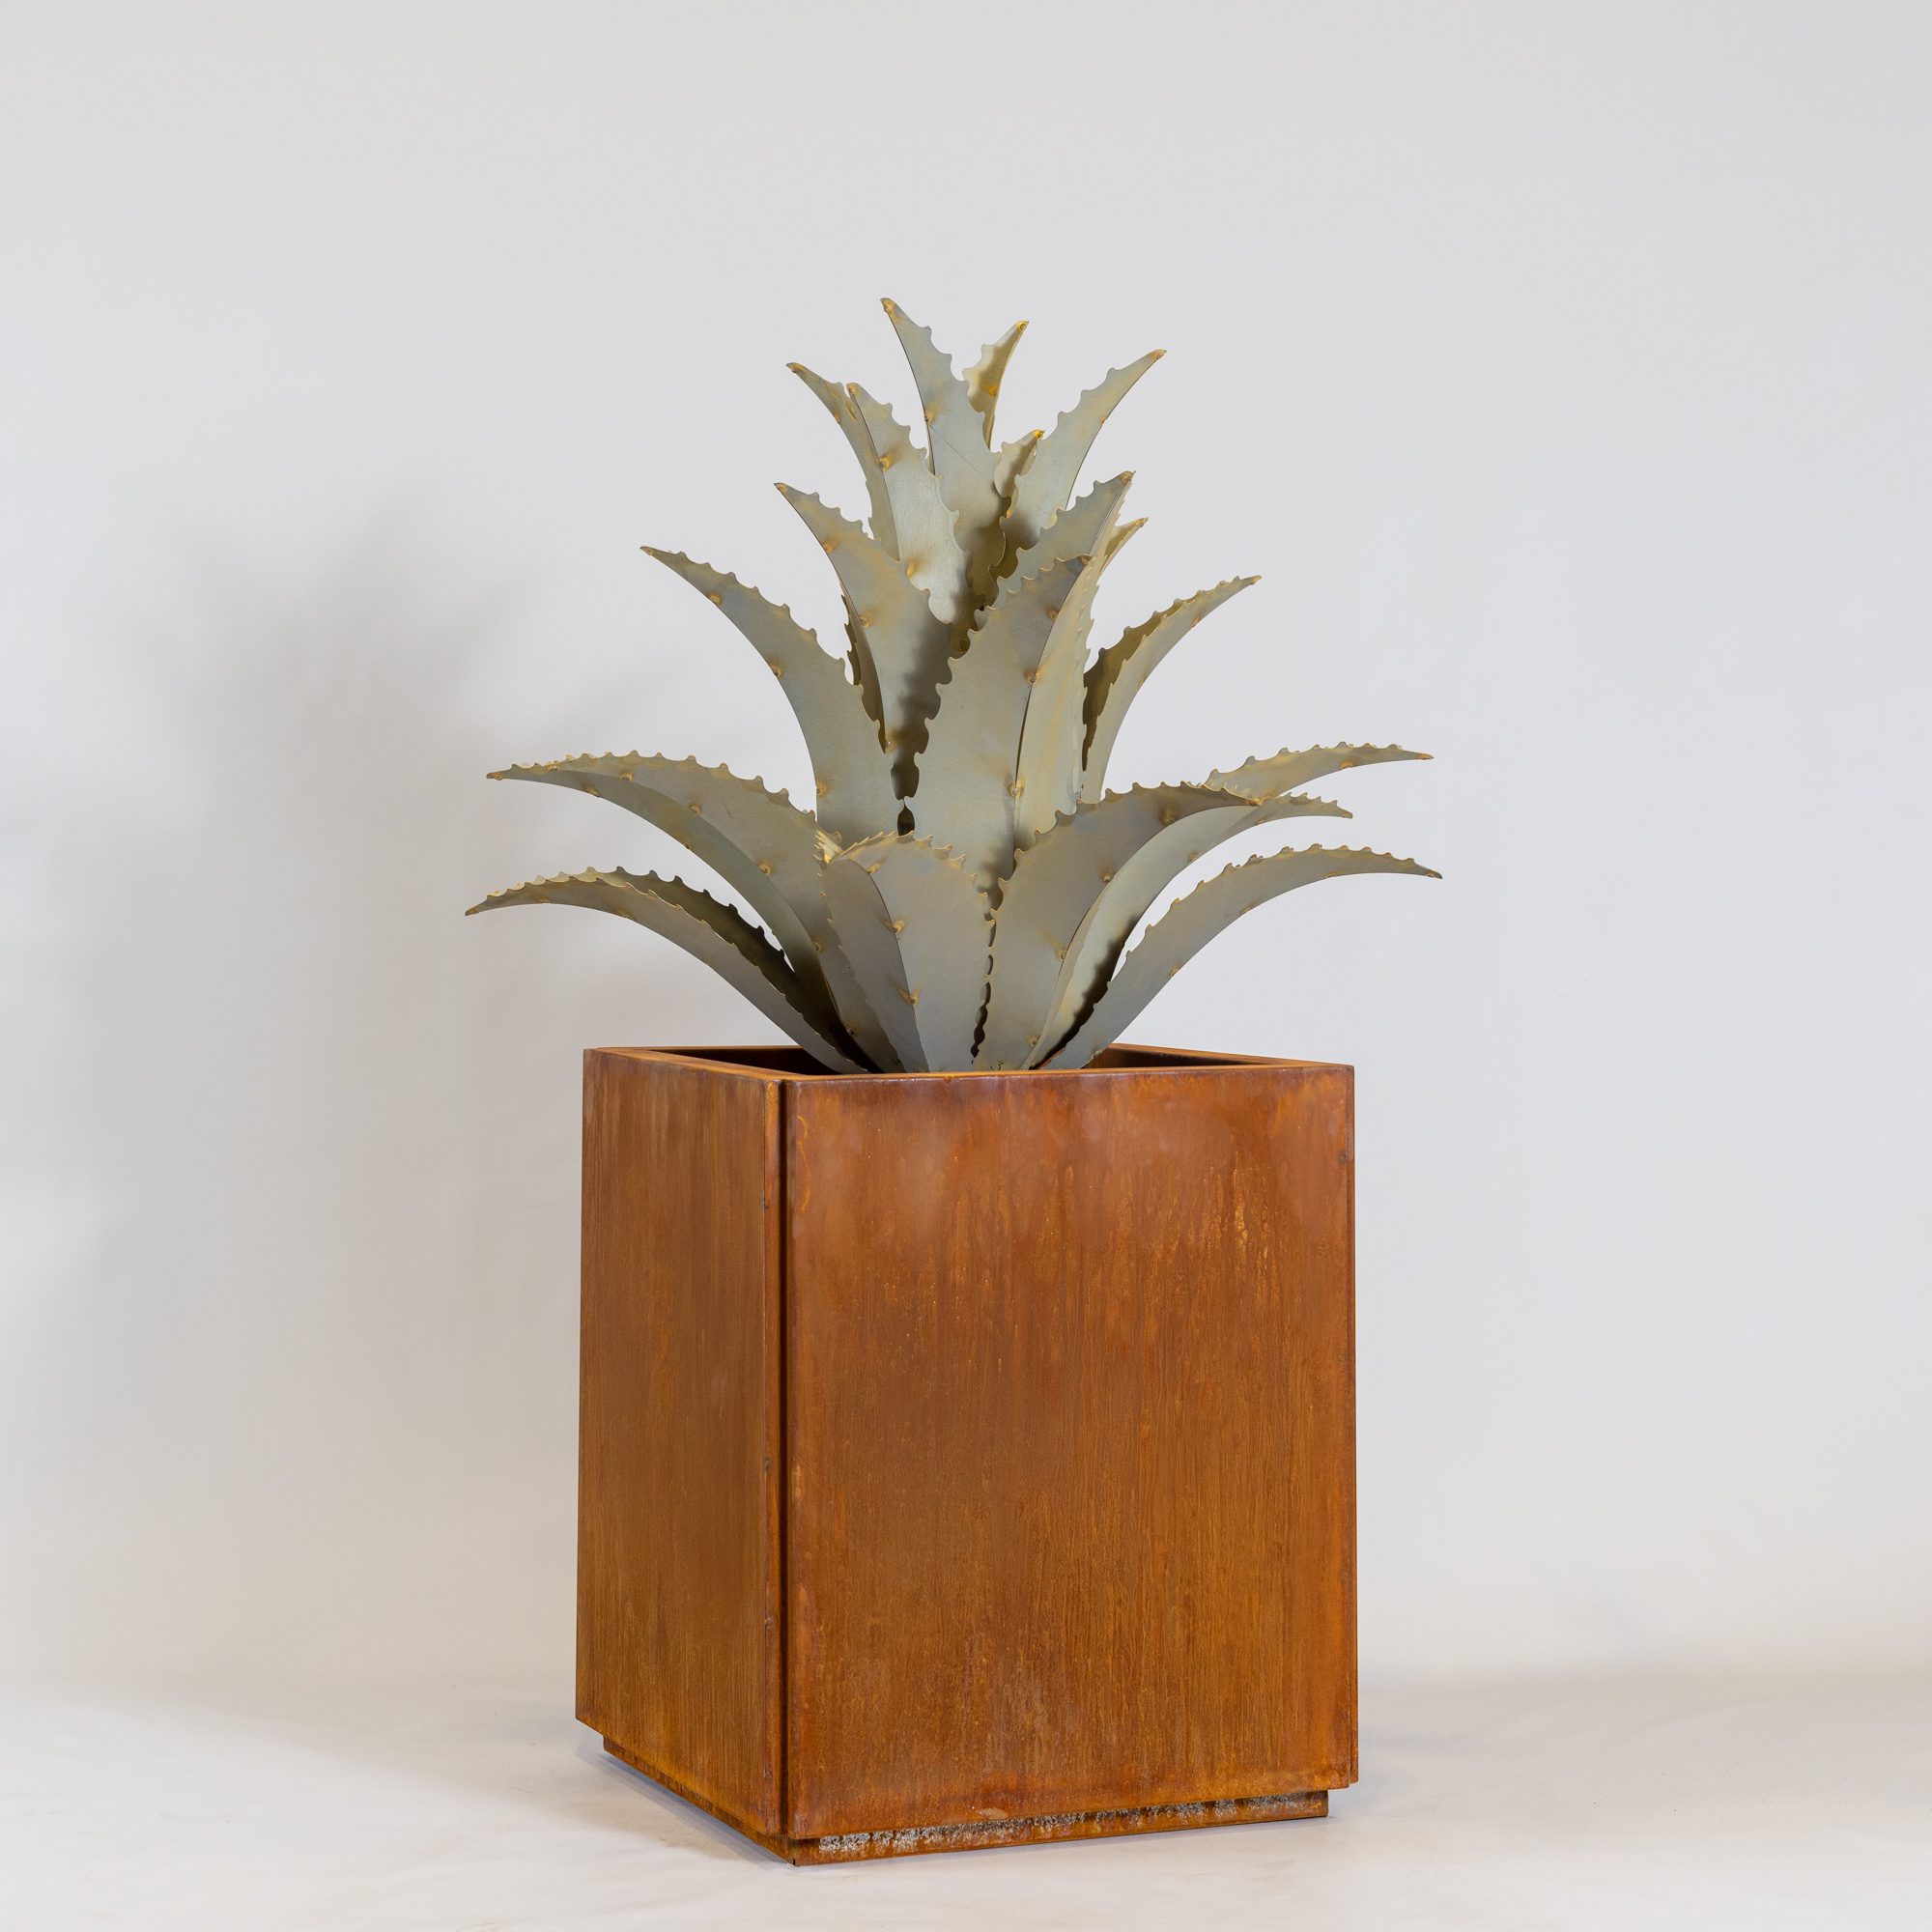 Sawtooth Agave in a planter